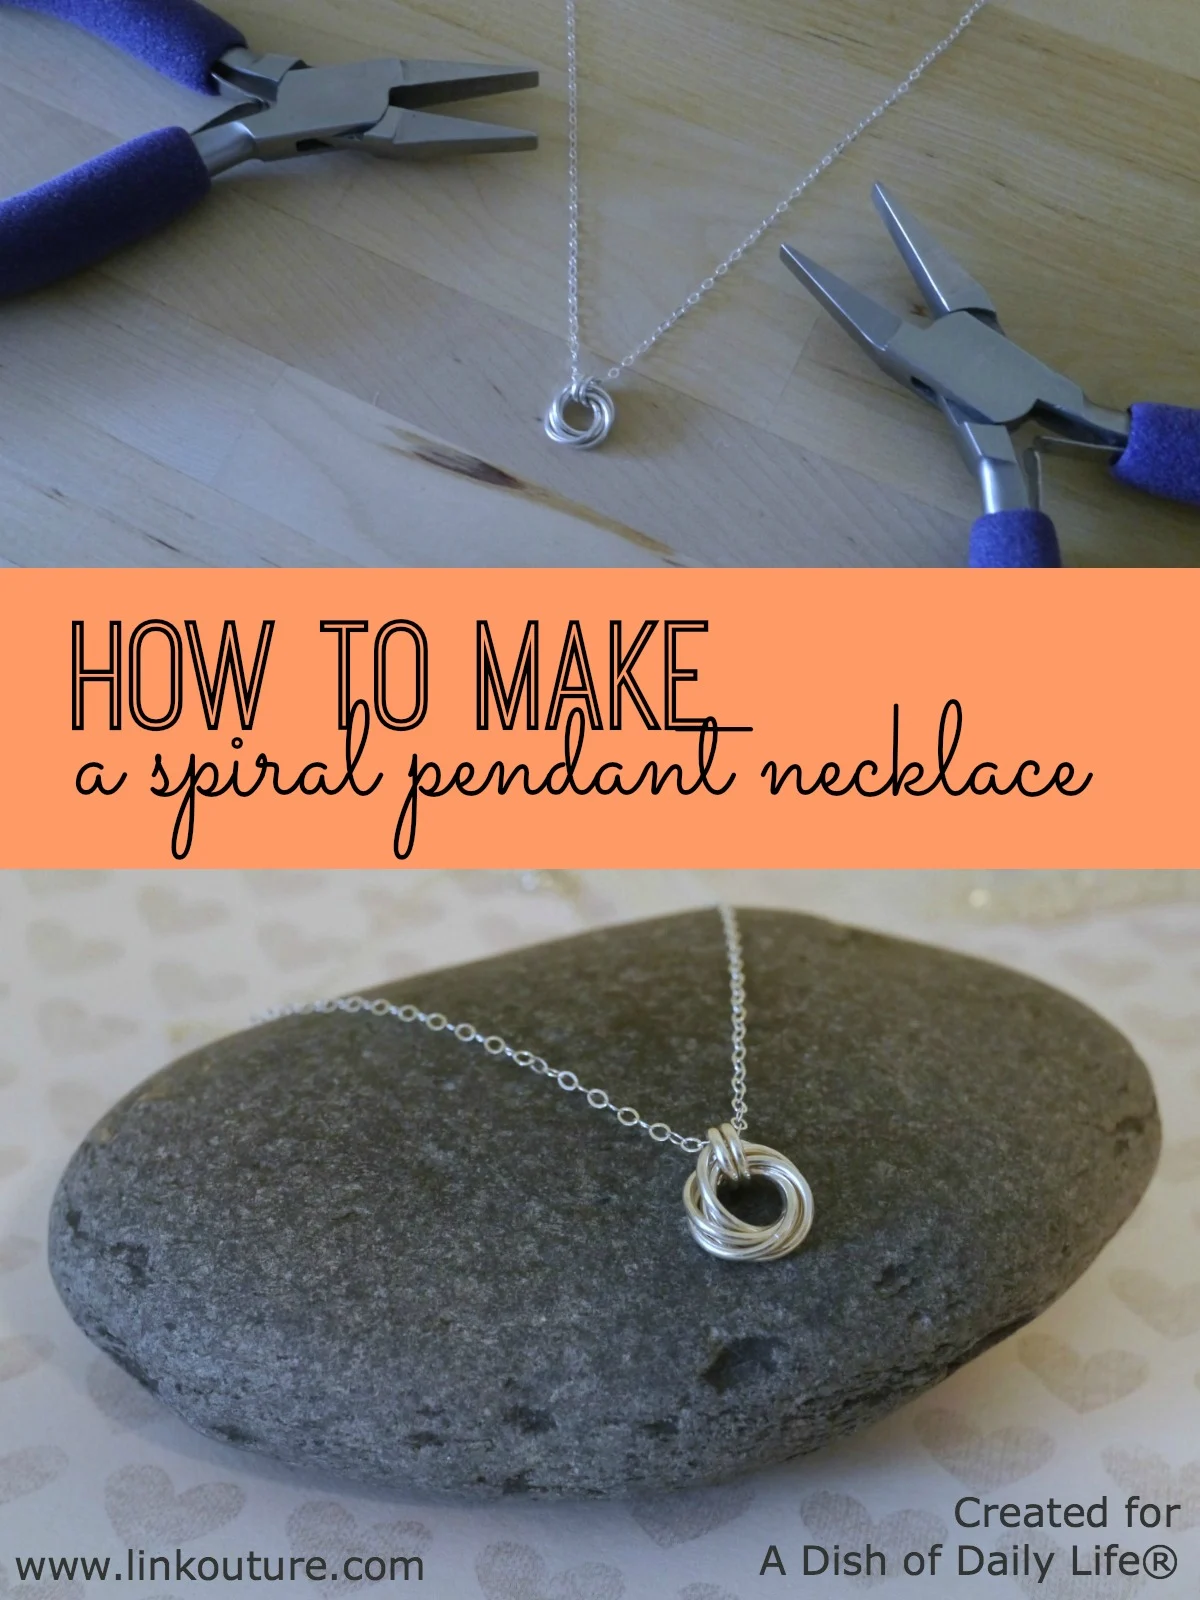 This DIY spiral pendant necklace jewelry tutorial is incredibly easy to make. It makes for a wonderful gift idea for Mother's Day or a special treat for yourself!